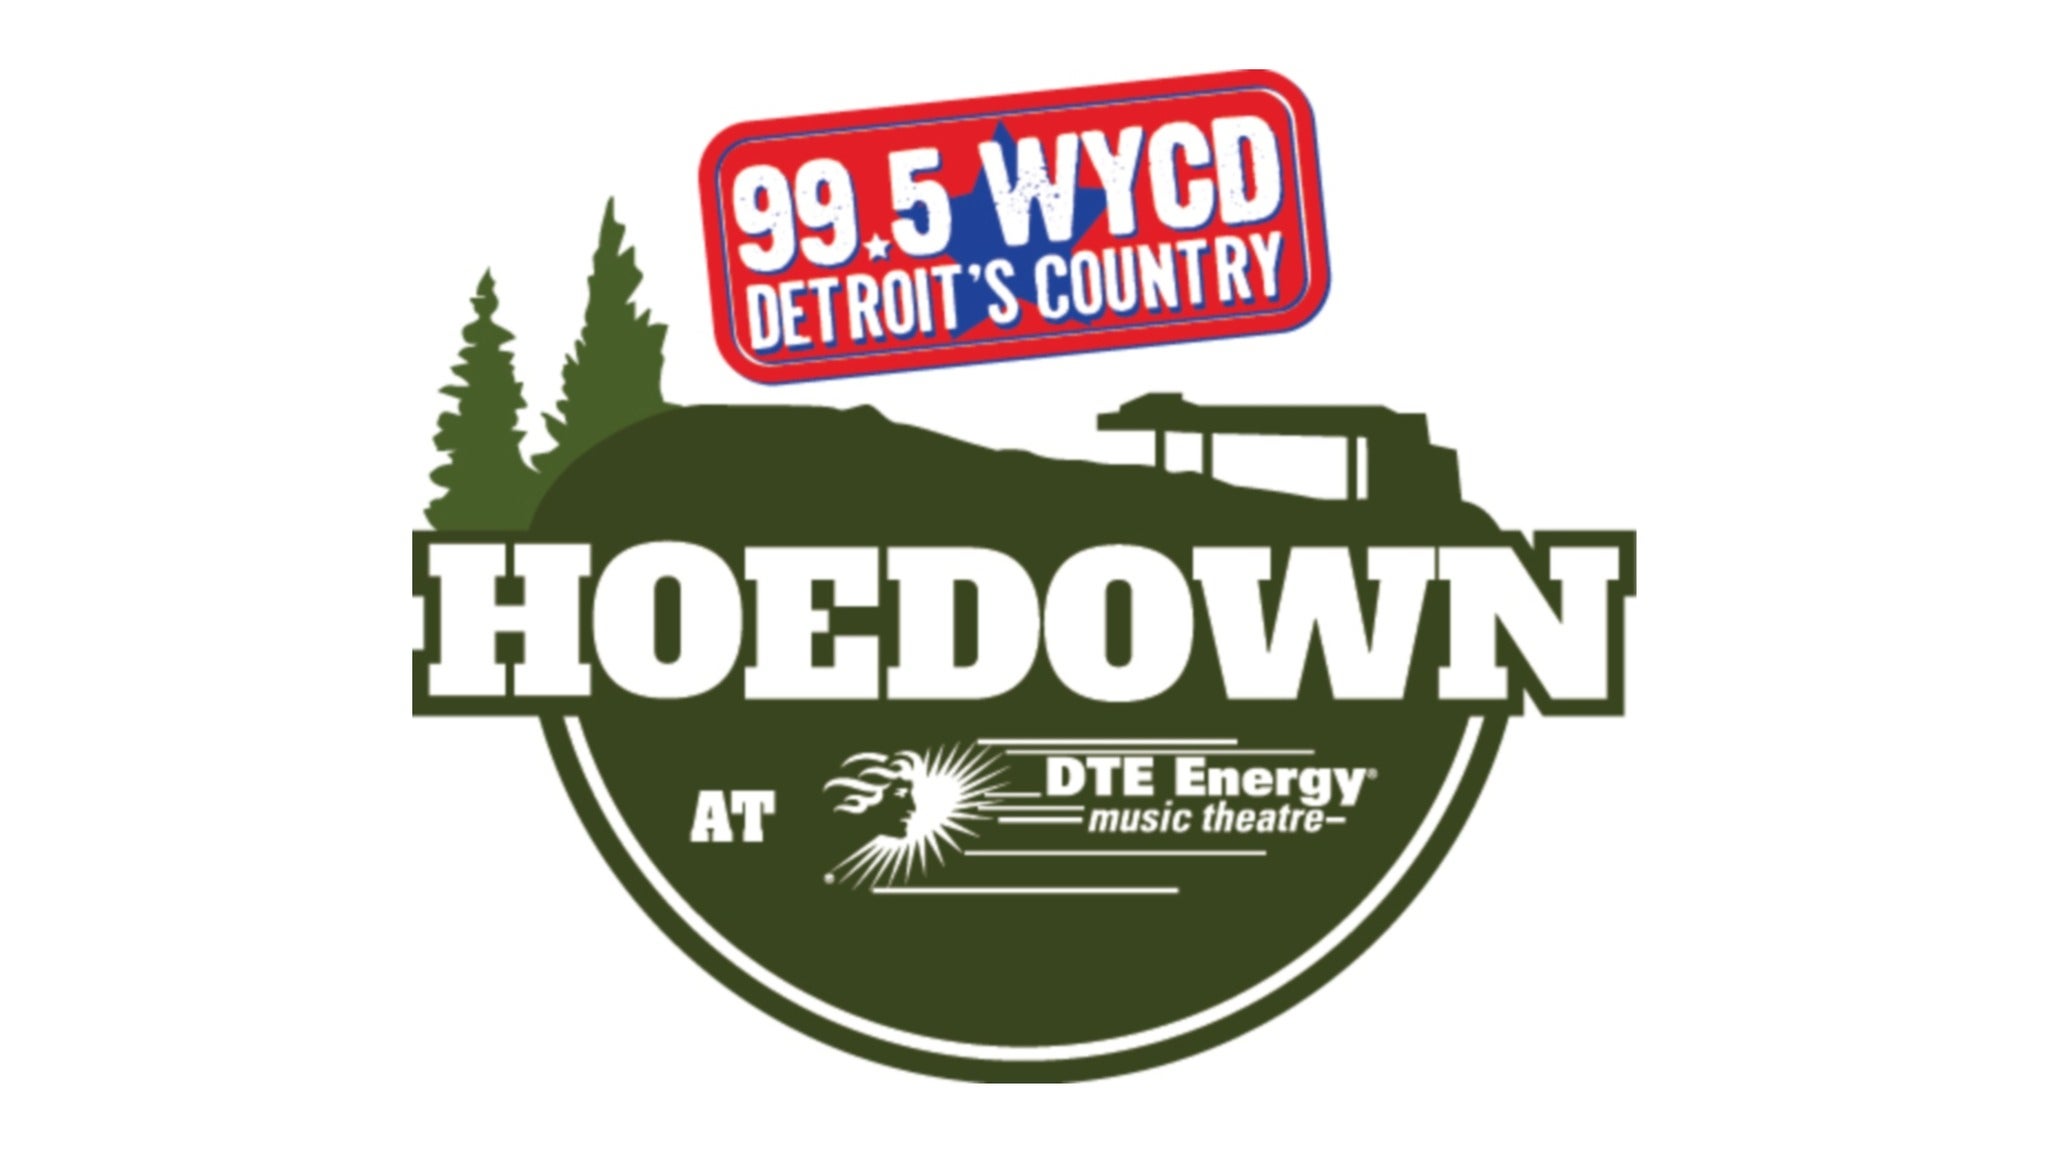 99.5 WYCD Hoedown Featuring Lady A in Clarkston promo photo for VIP Package Public Onsale presale offer code